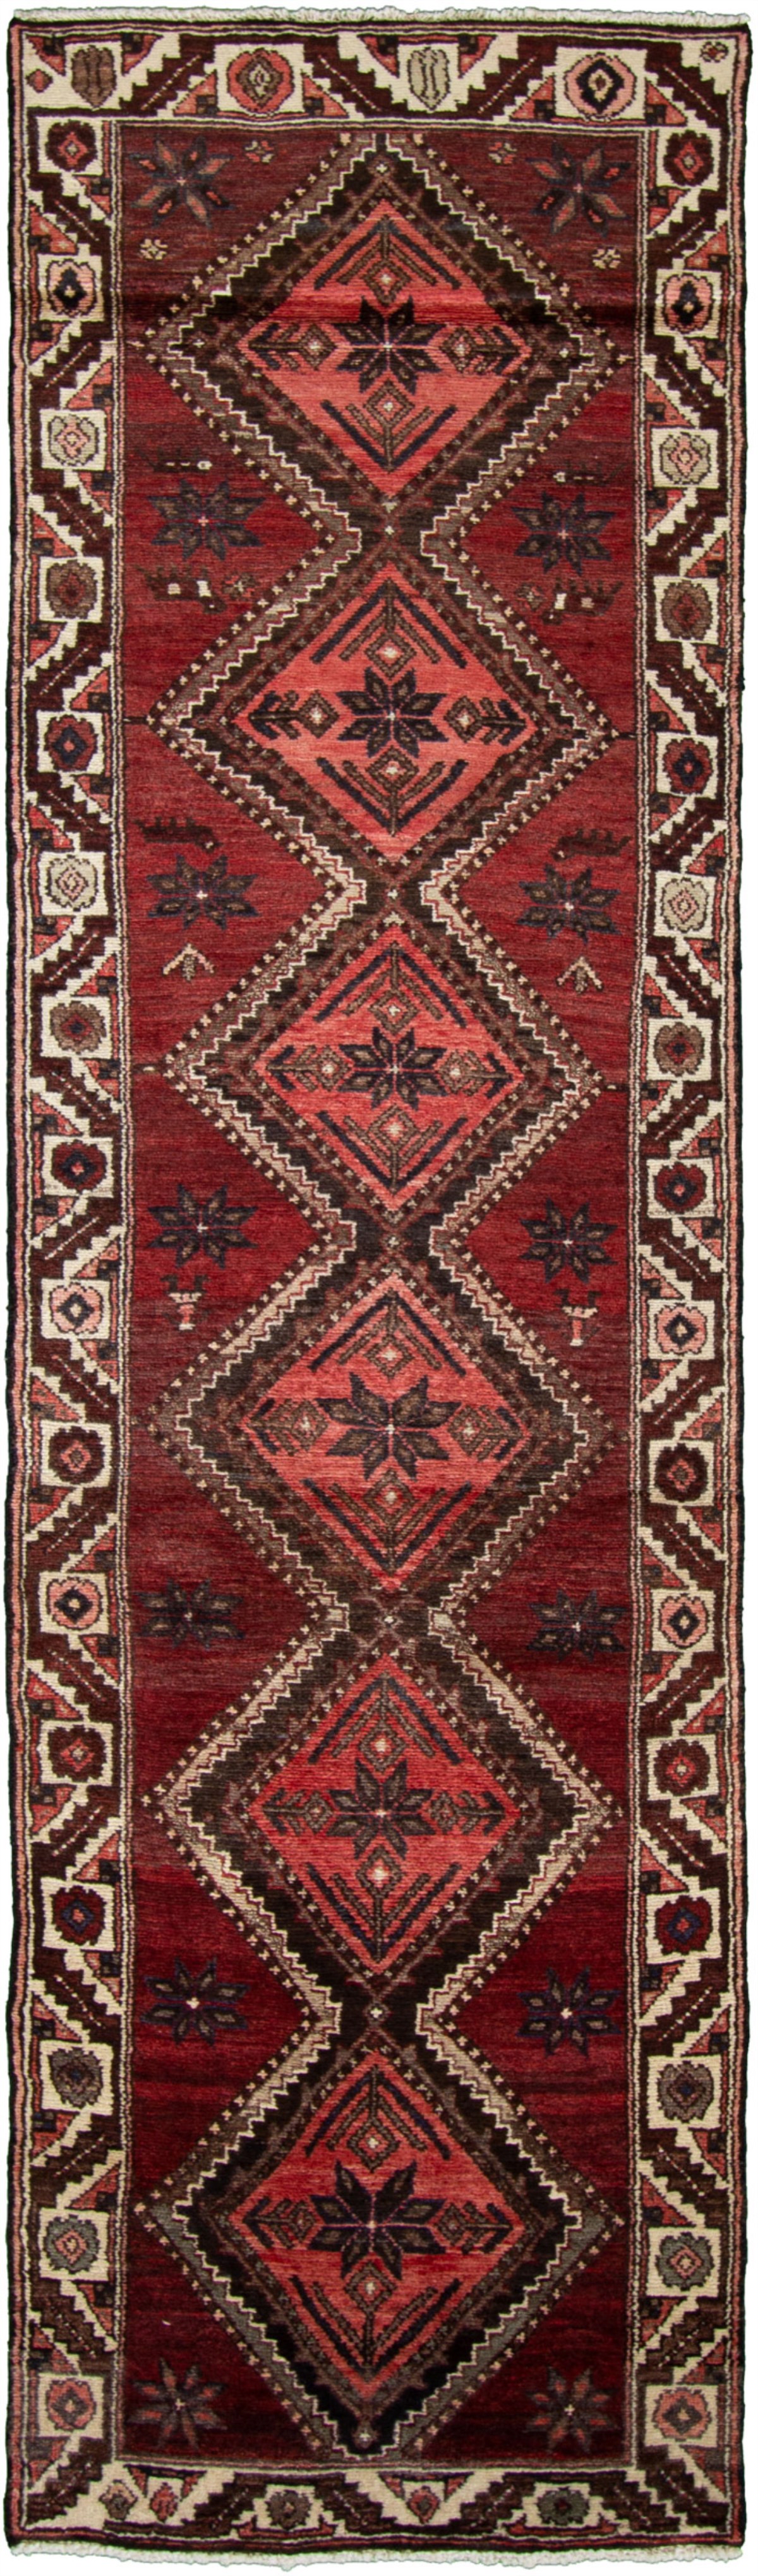 Hand-knotted Koliai Dark Red Wool Rug 2'11" x 9'8" Size: 2'11" x 9'8"  